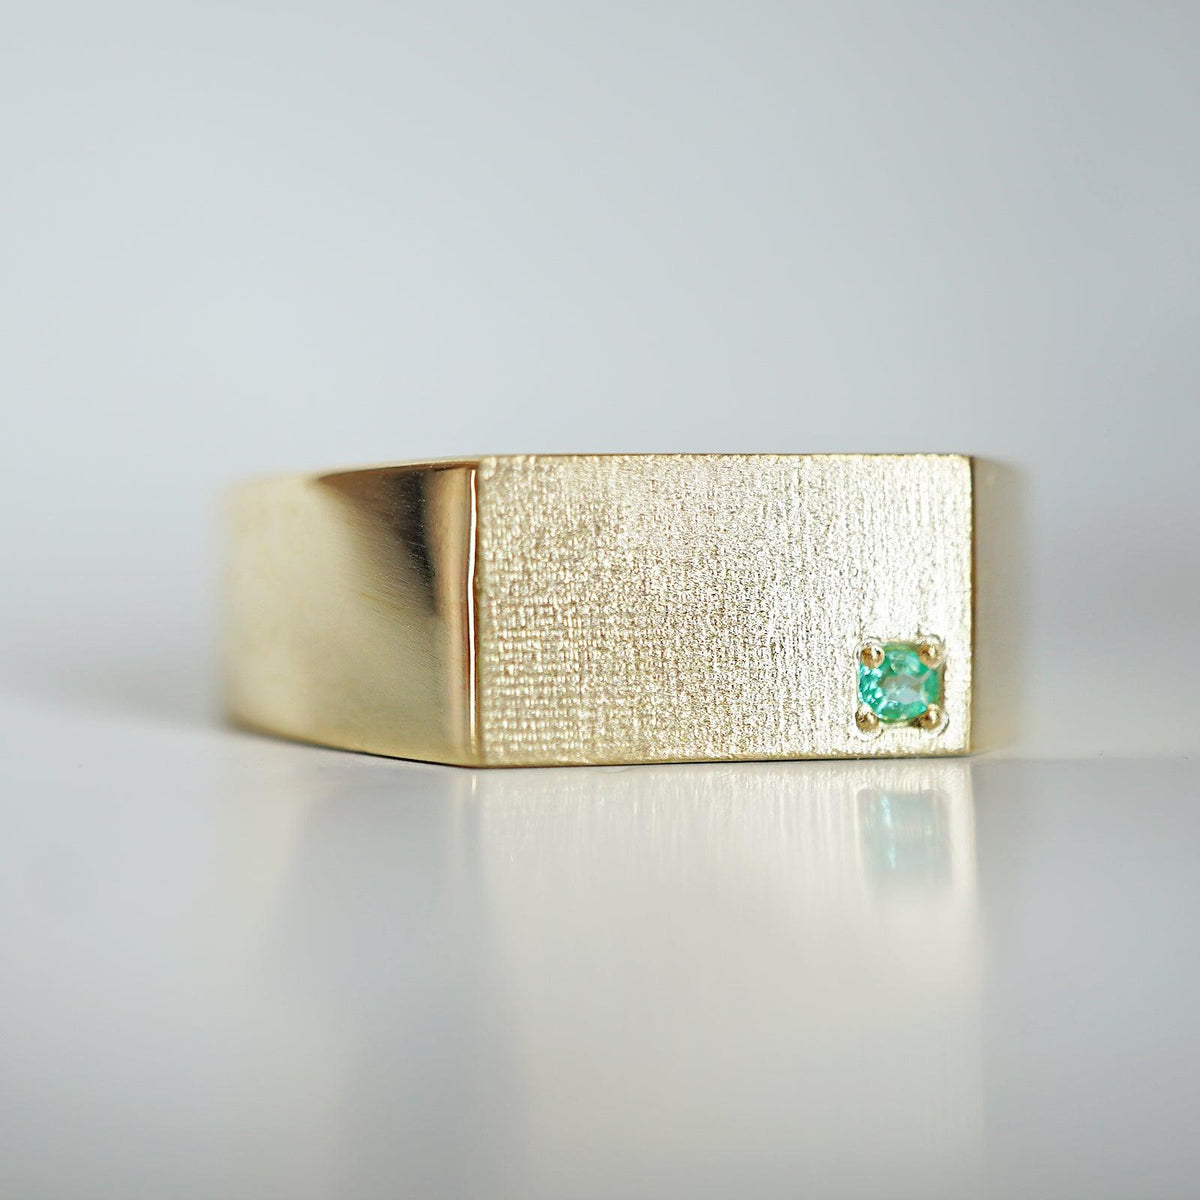 Paraiba Tourmaline Signet Ring in Sterling Silver and 14K Gold, 8mm